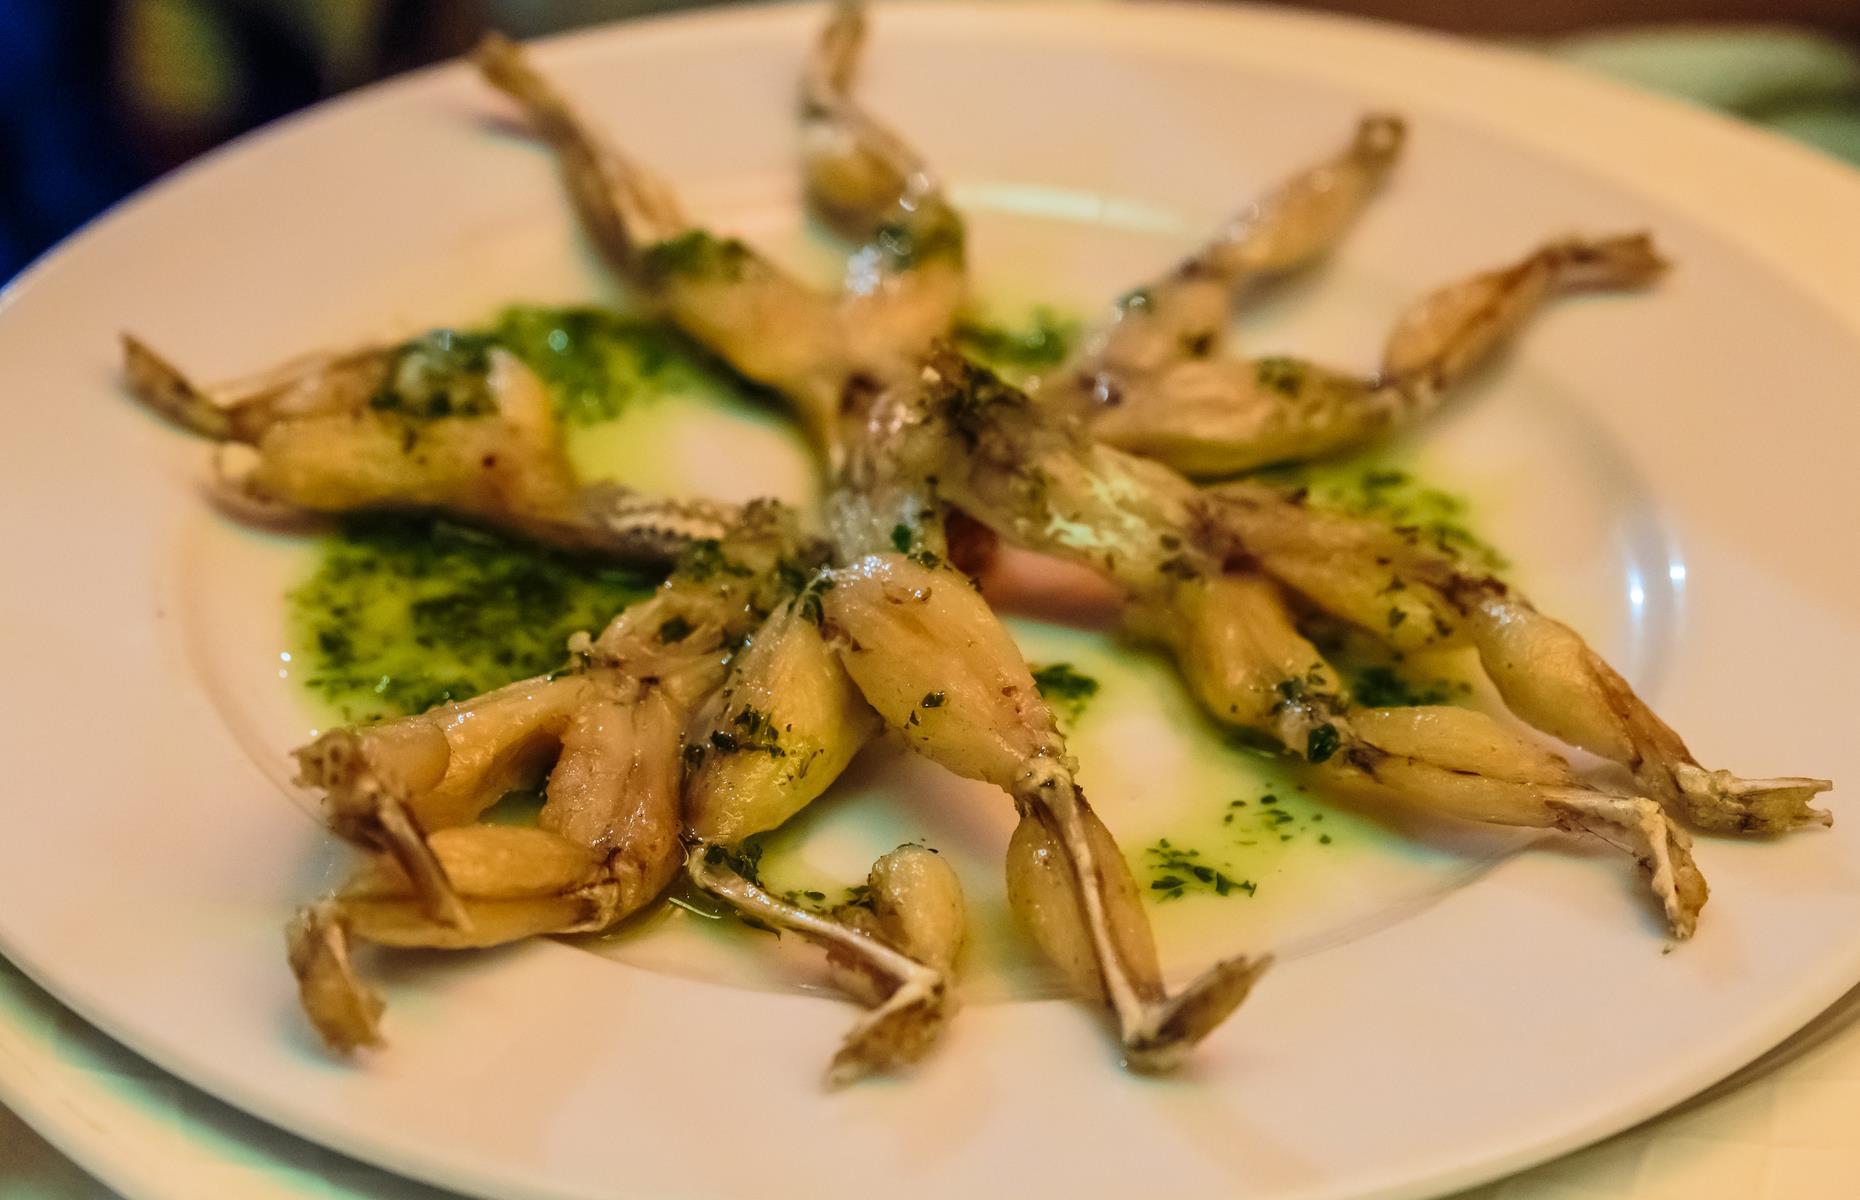 Indonesia hops to it with frogs' legs